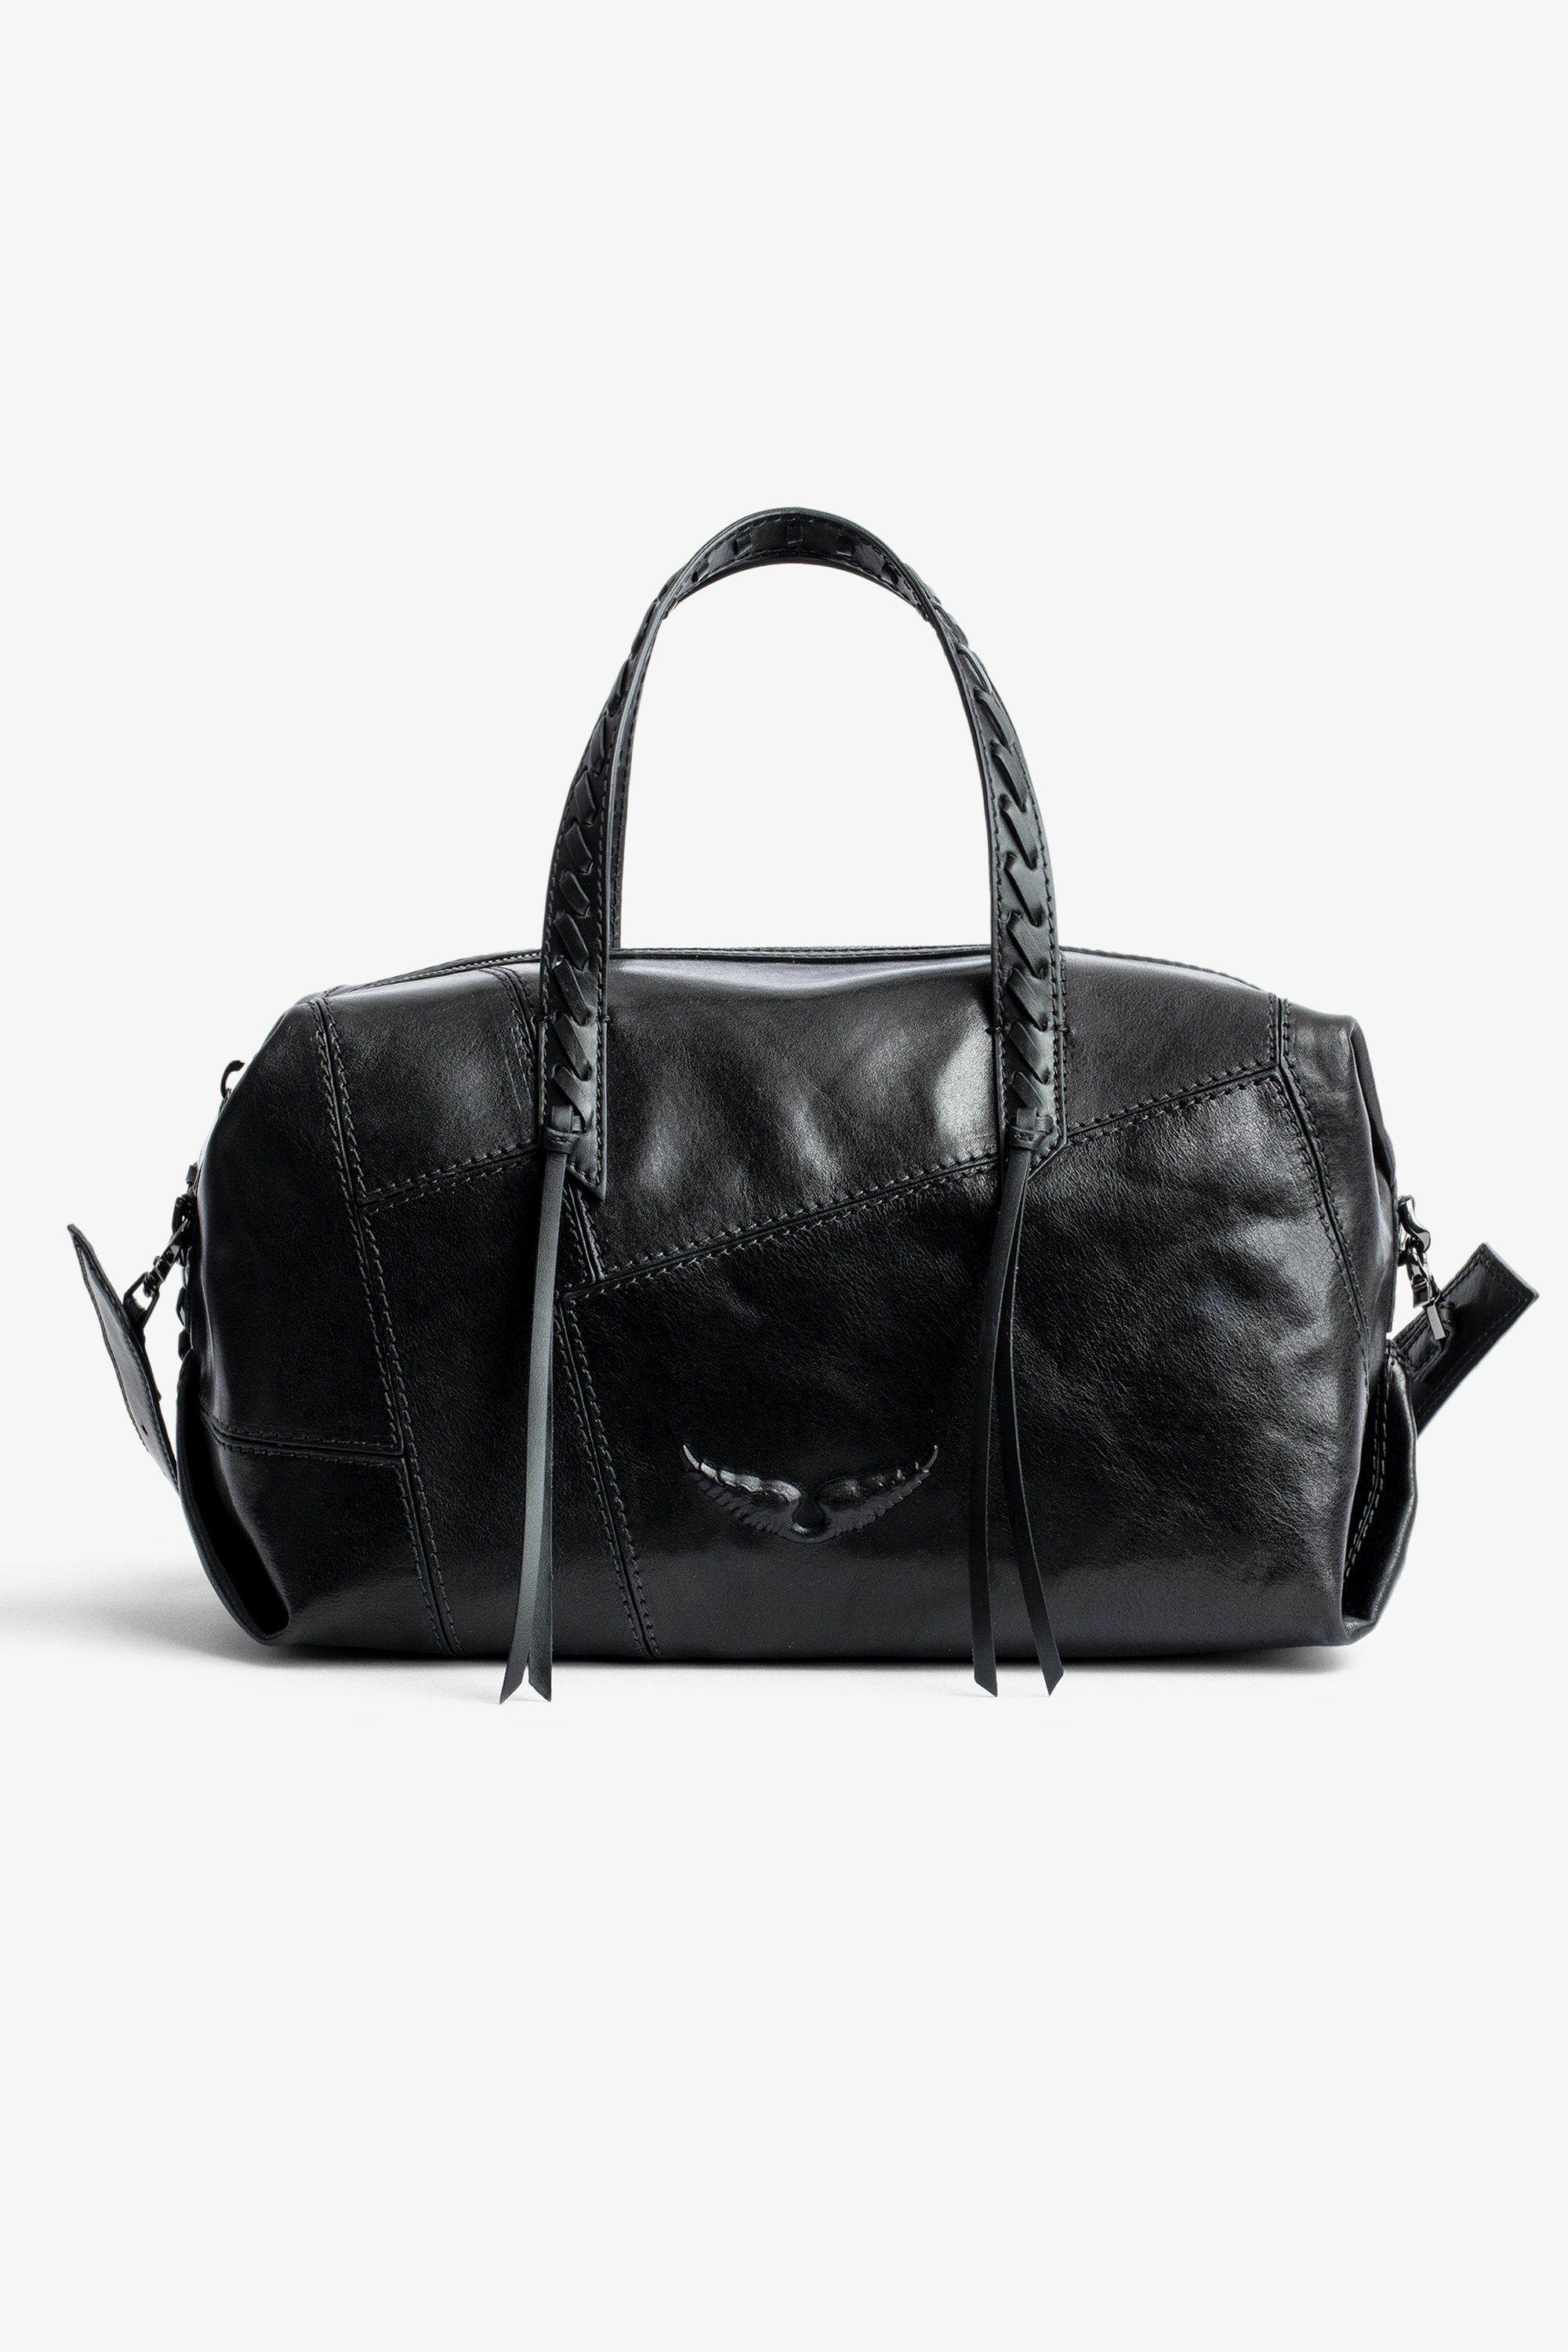 Le Cecilia Duffle Patchwork バッグ Women’s black leather zipped bag with handles and shoulder strap